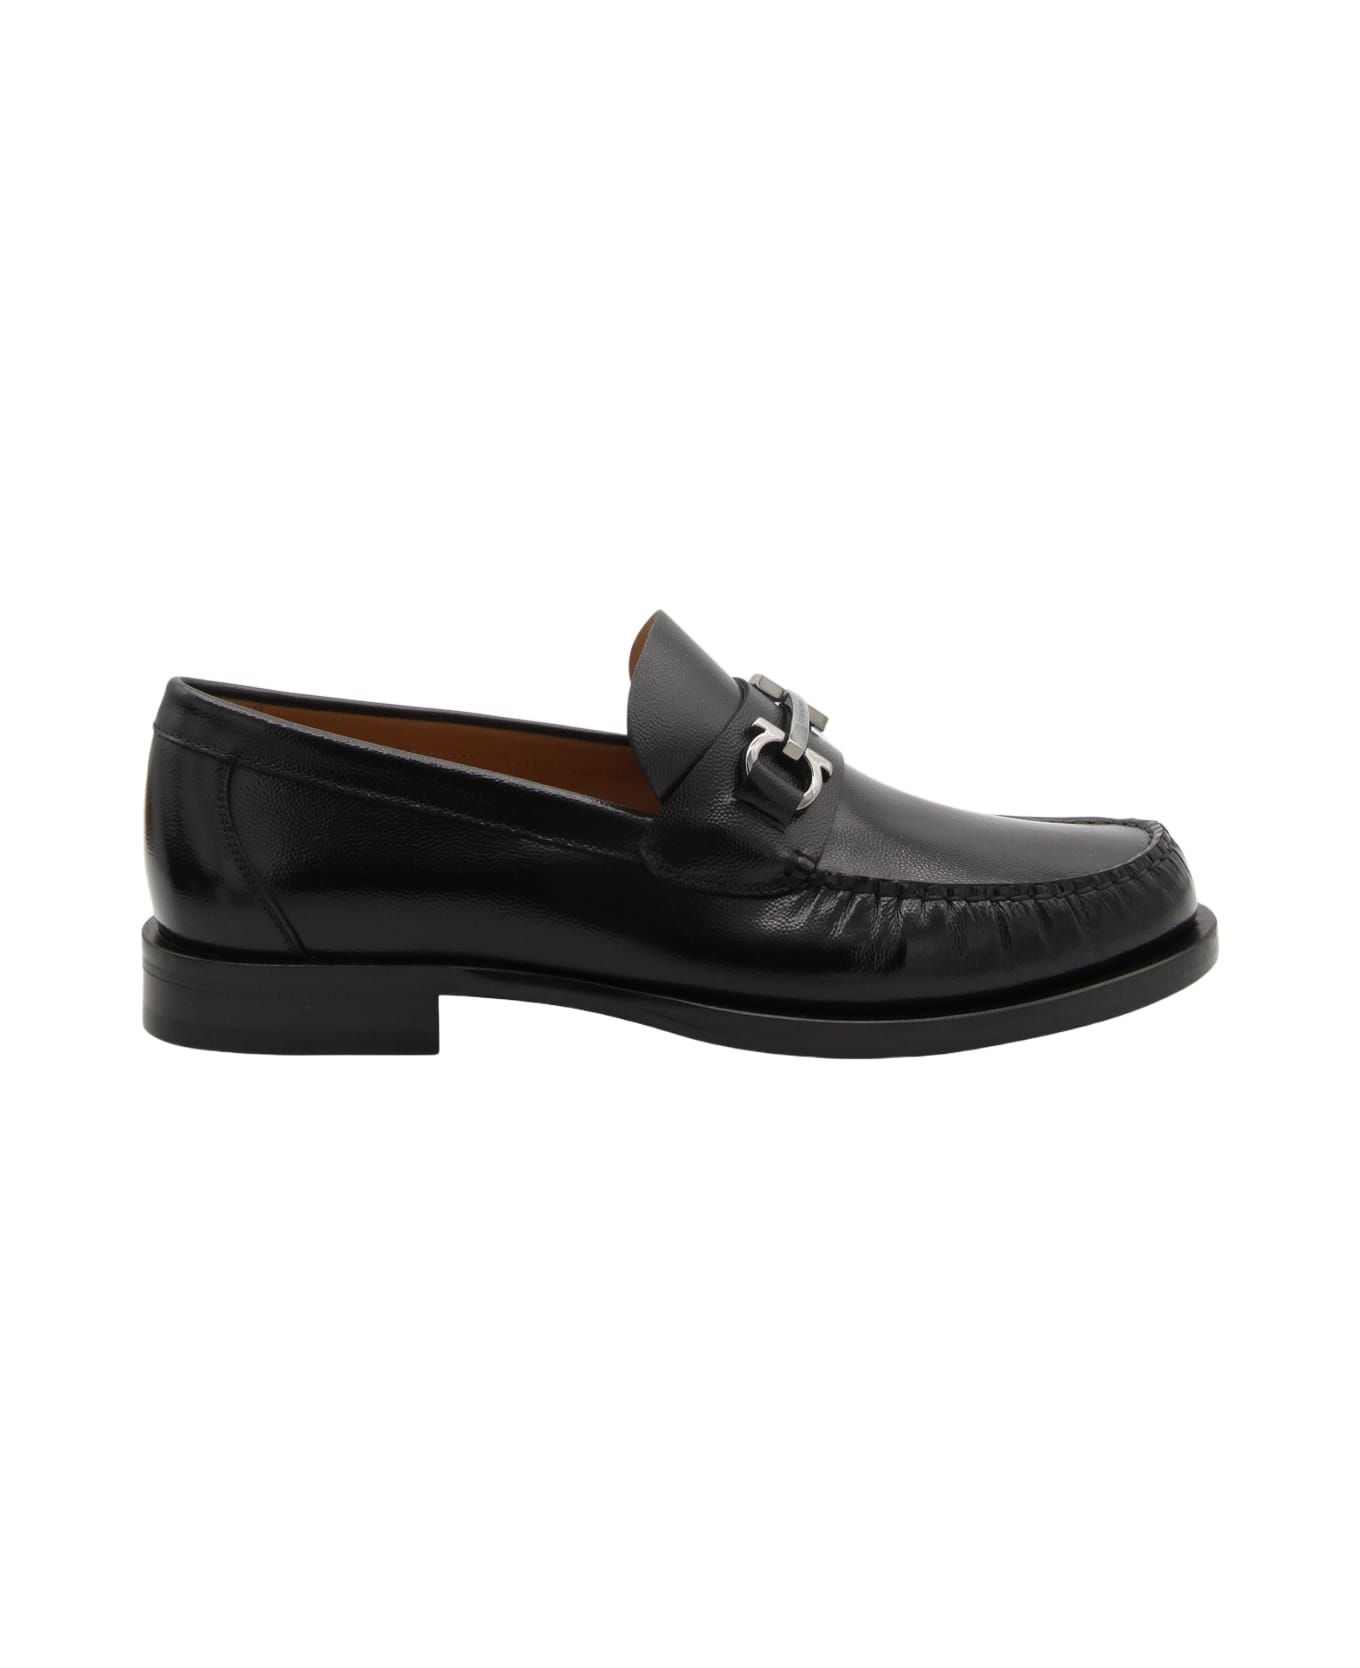 Ferragamo Black And New Biscuit Leather Loafers - NERO/NEW BISCOTTO